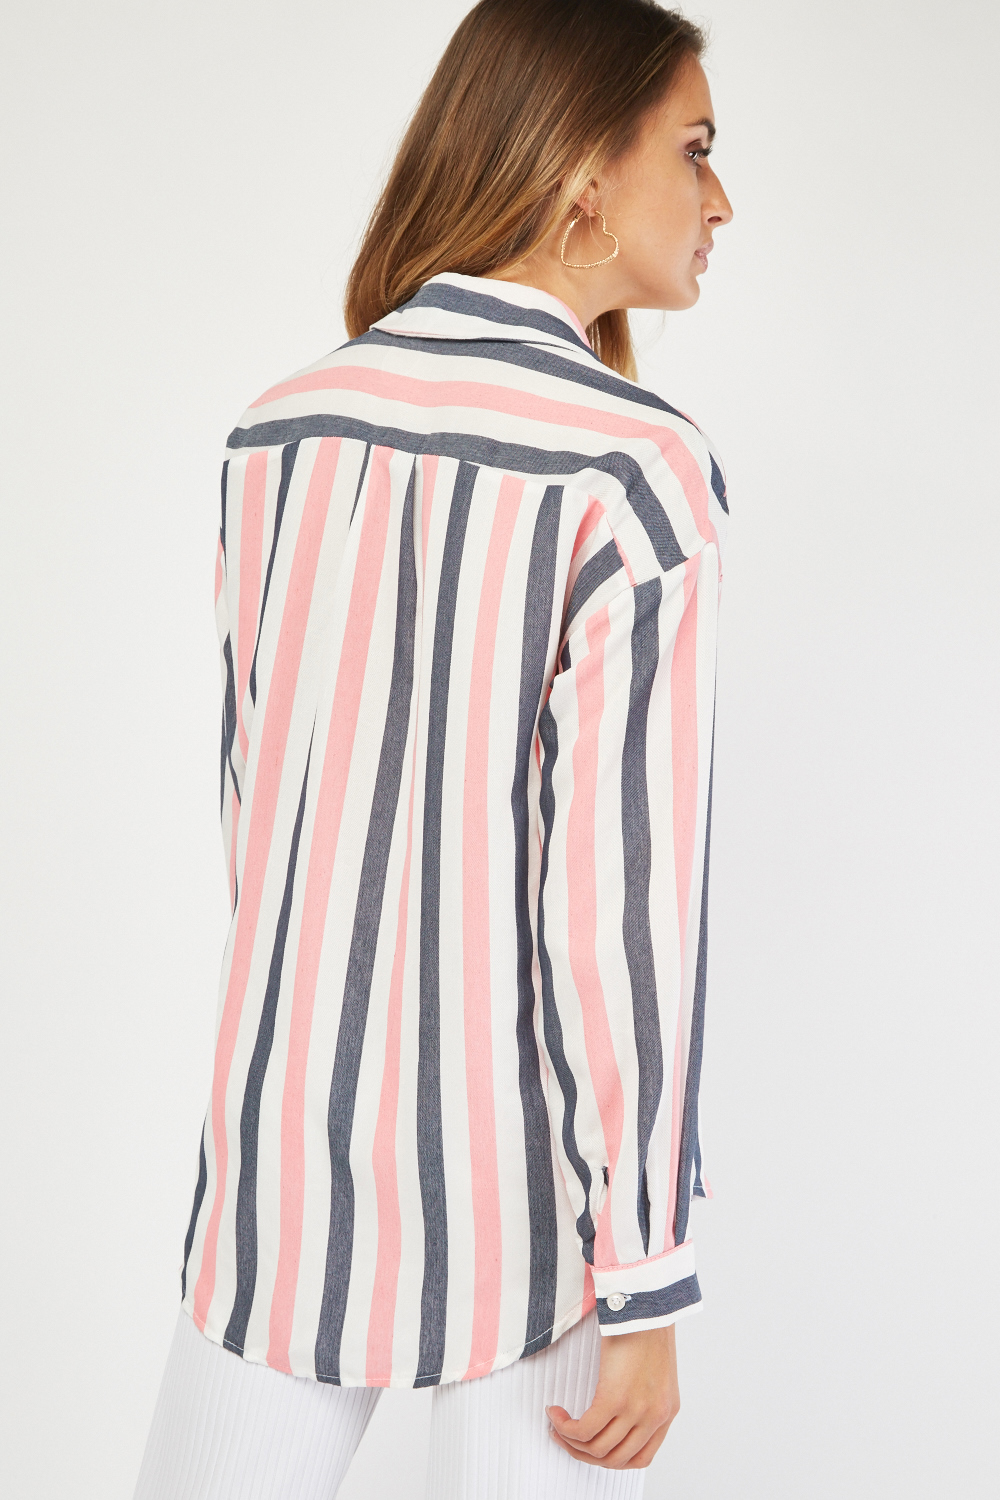 Embroidered Candy Stripe Shirt - Just $3